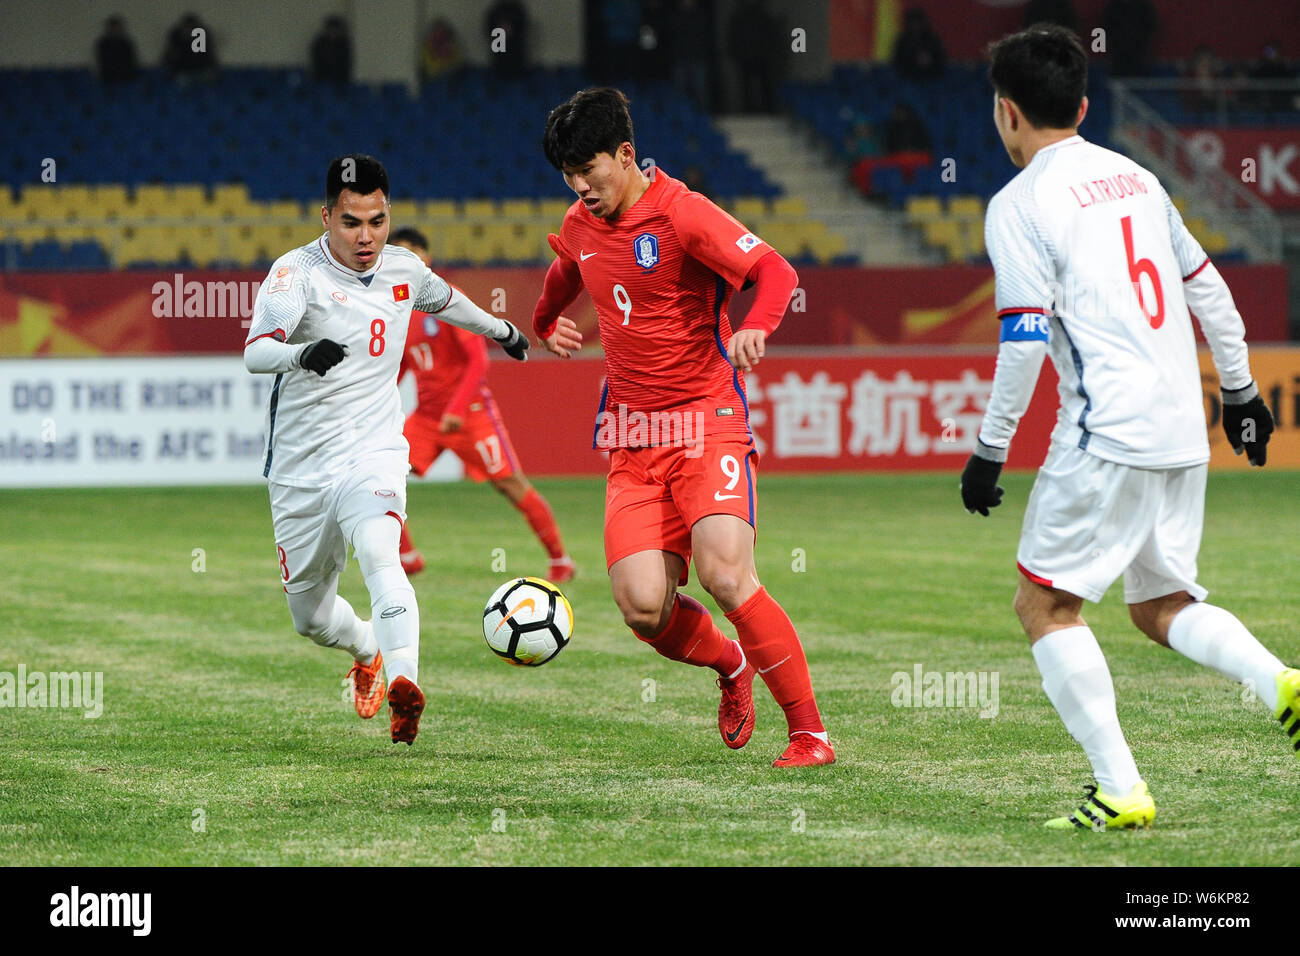 Lee Keun Ho, center, of South Korea kicks the ball to make a pass against players of Vietnam in their Group D match during the 2018 AFC U-23 Champions Stock Photo